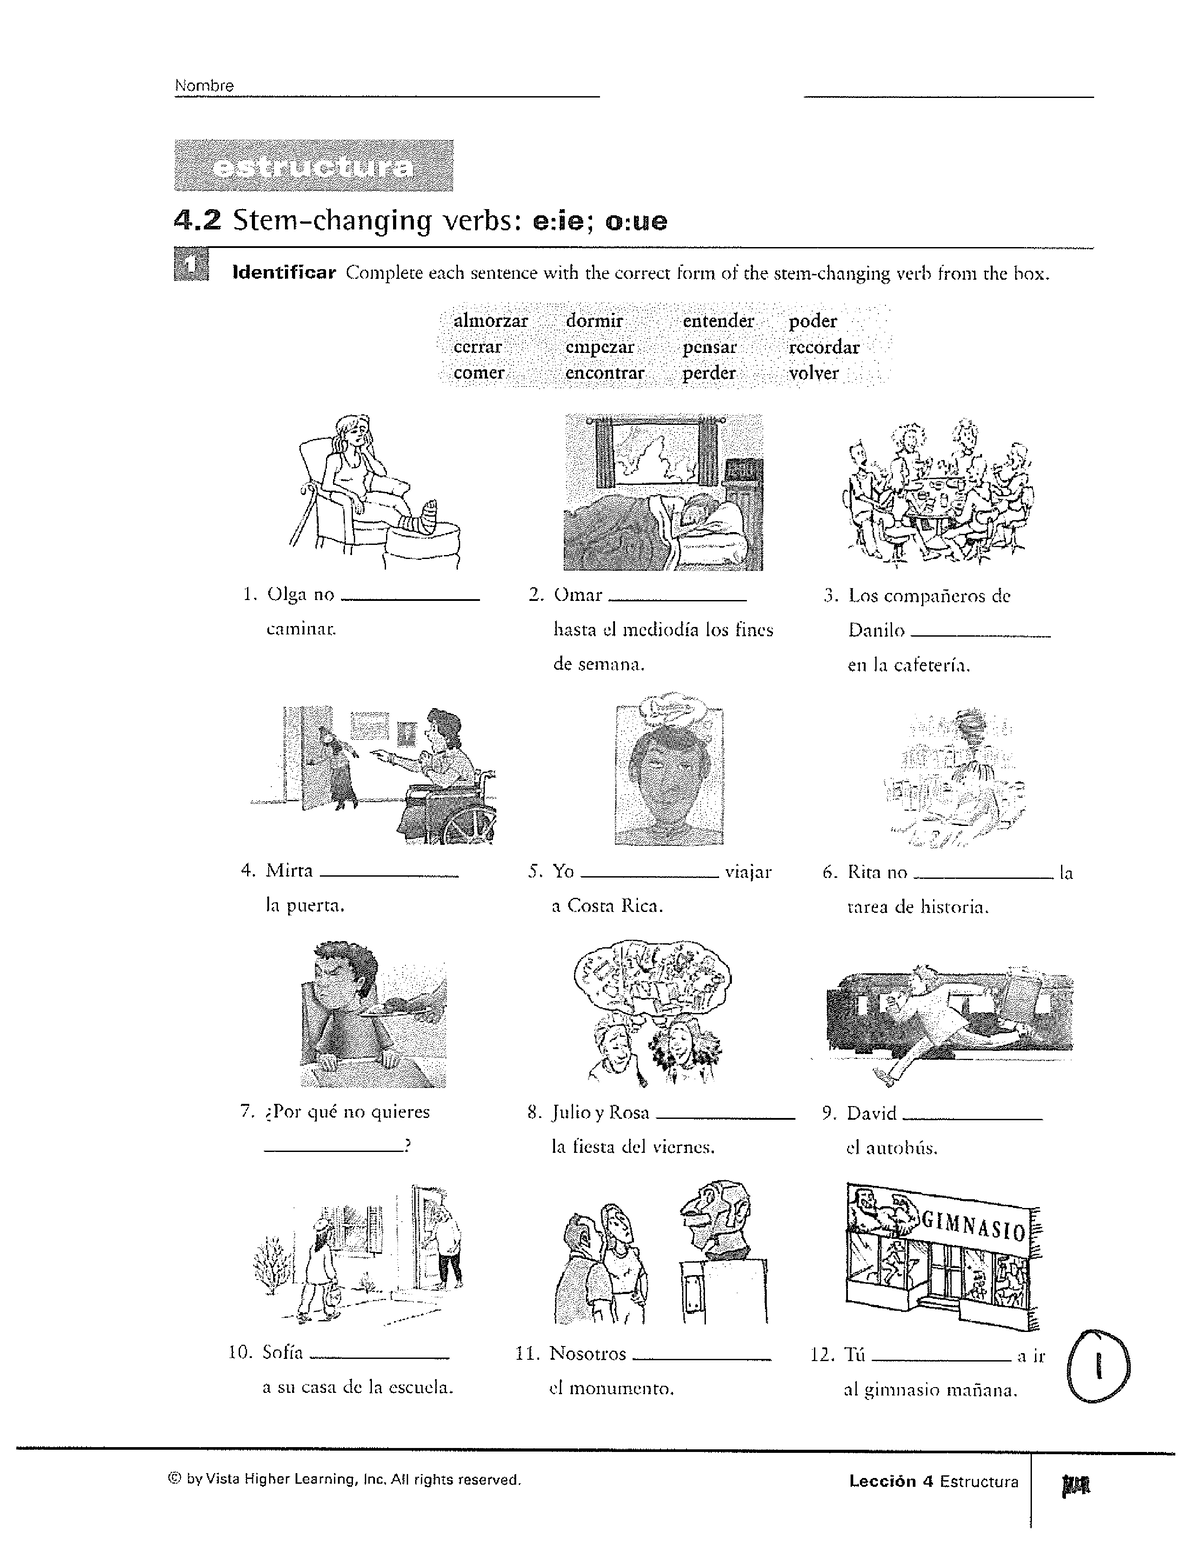 K g k sch ZG22222222j Z2222Vl QGZhcm 22222222pbmdk YWxlc 2222Nob22222scy22vcmc 0422222222b stem Within Stem Changing Verbs Worksheet Answers